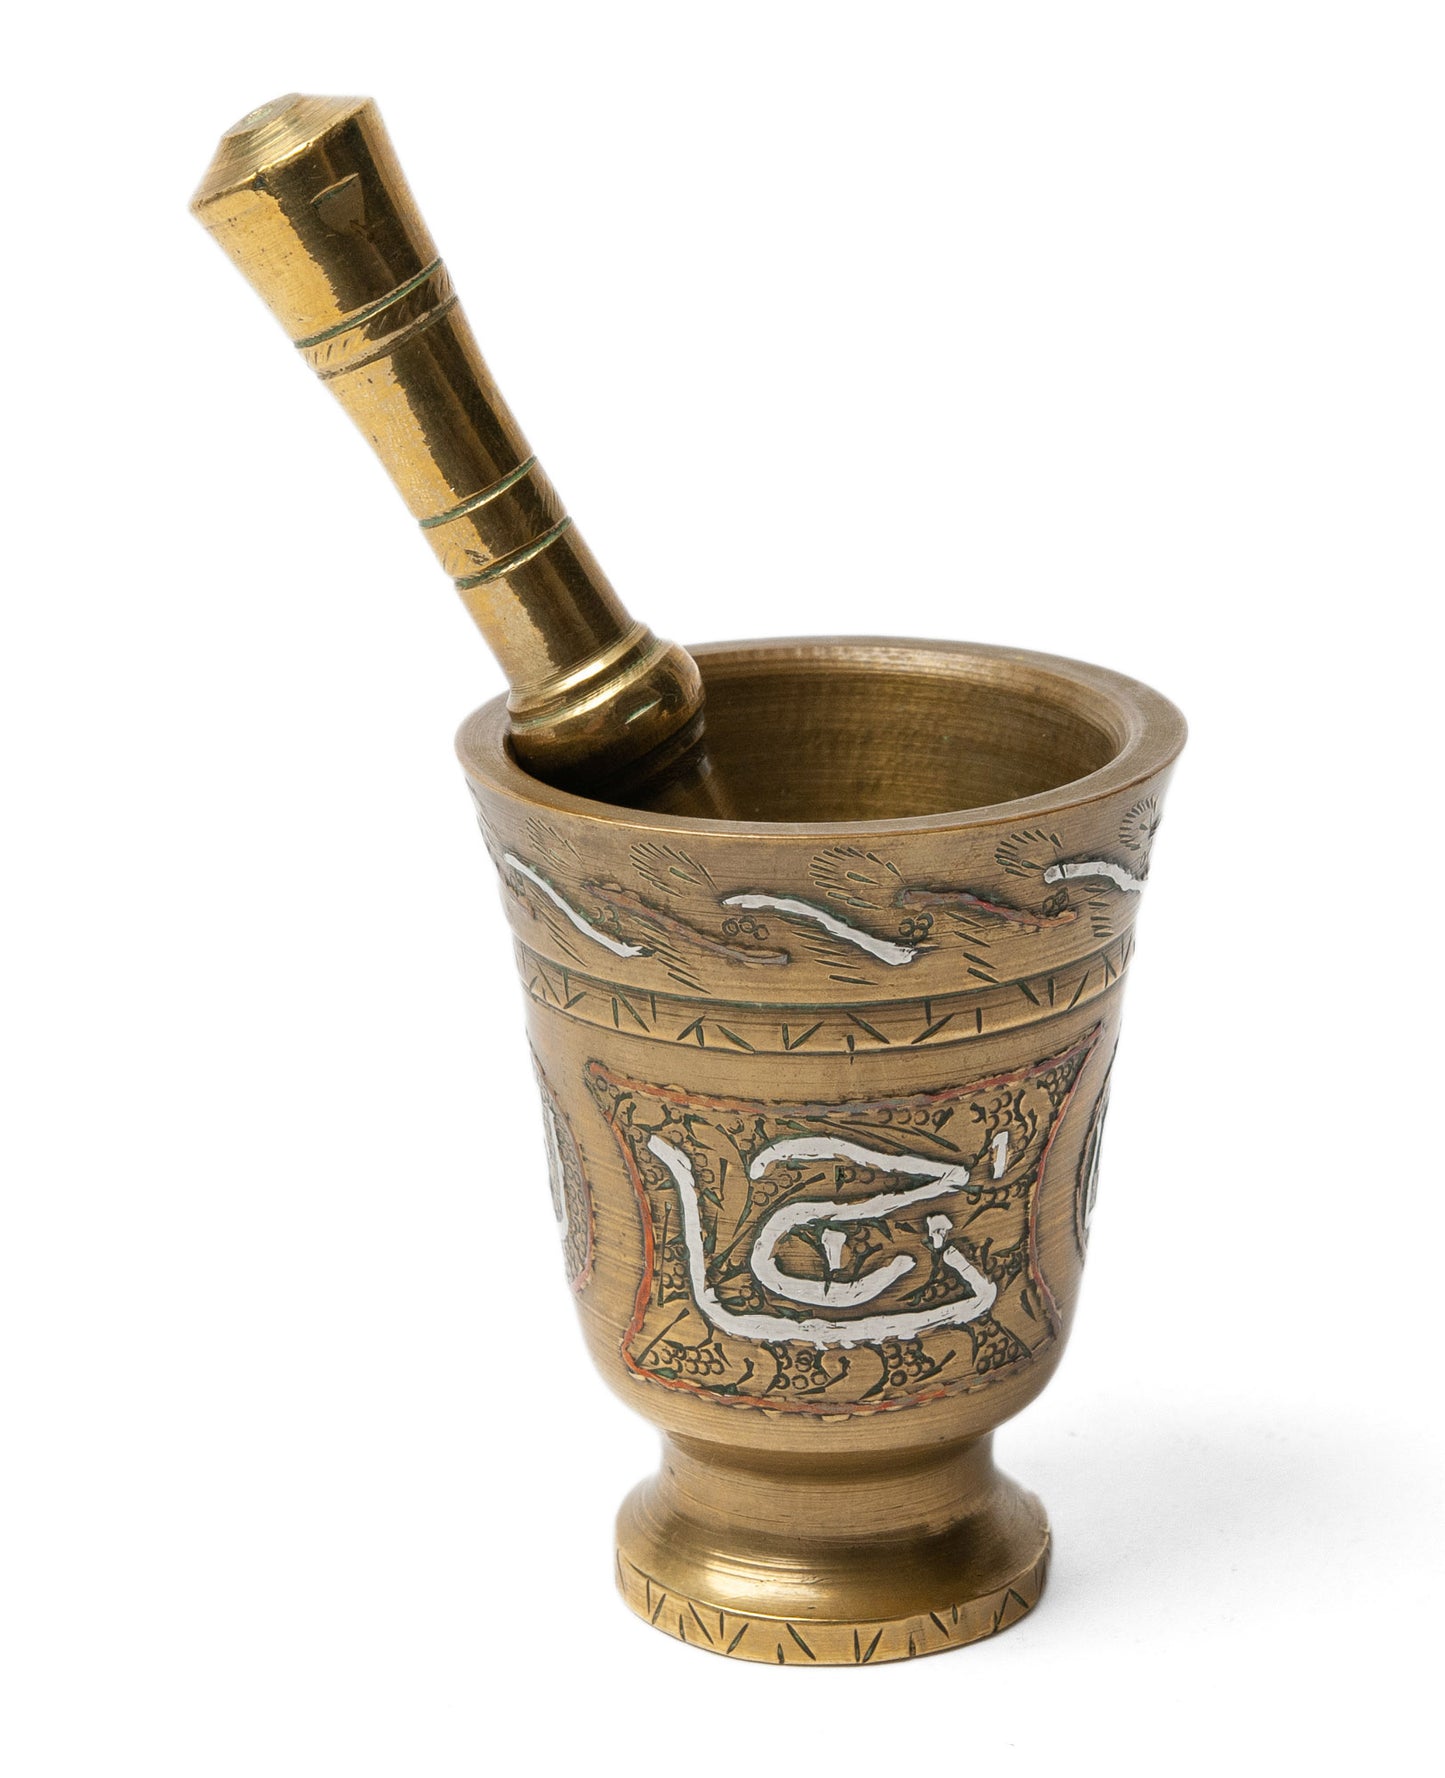 Vintage Cairoware Islamic Small Brass Pestle & Mortar with Copper & Silver Inlay (Code 1113)